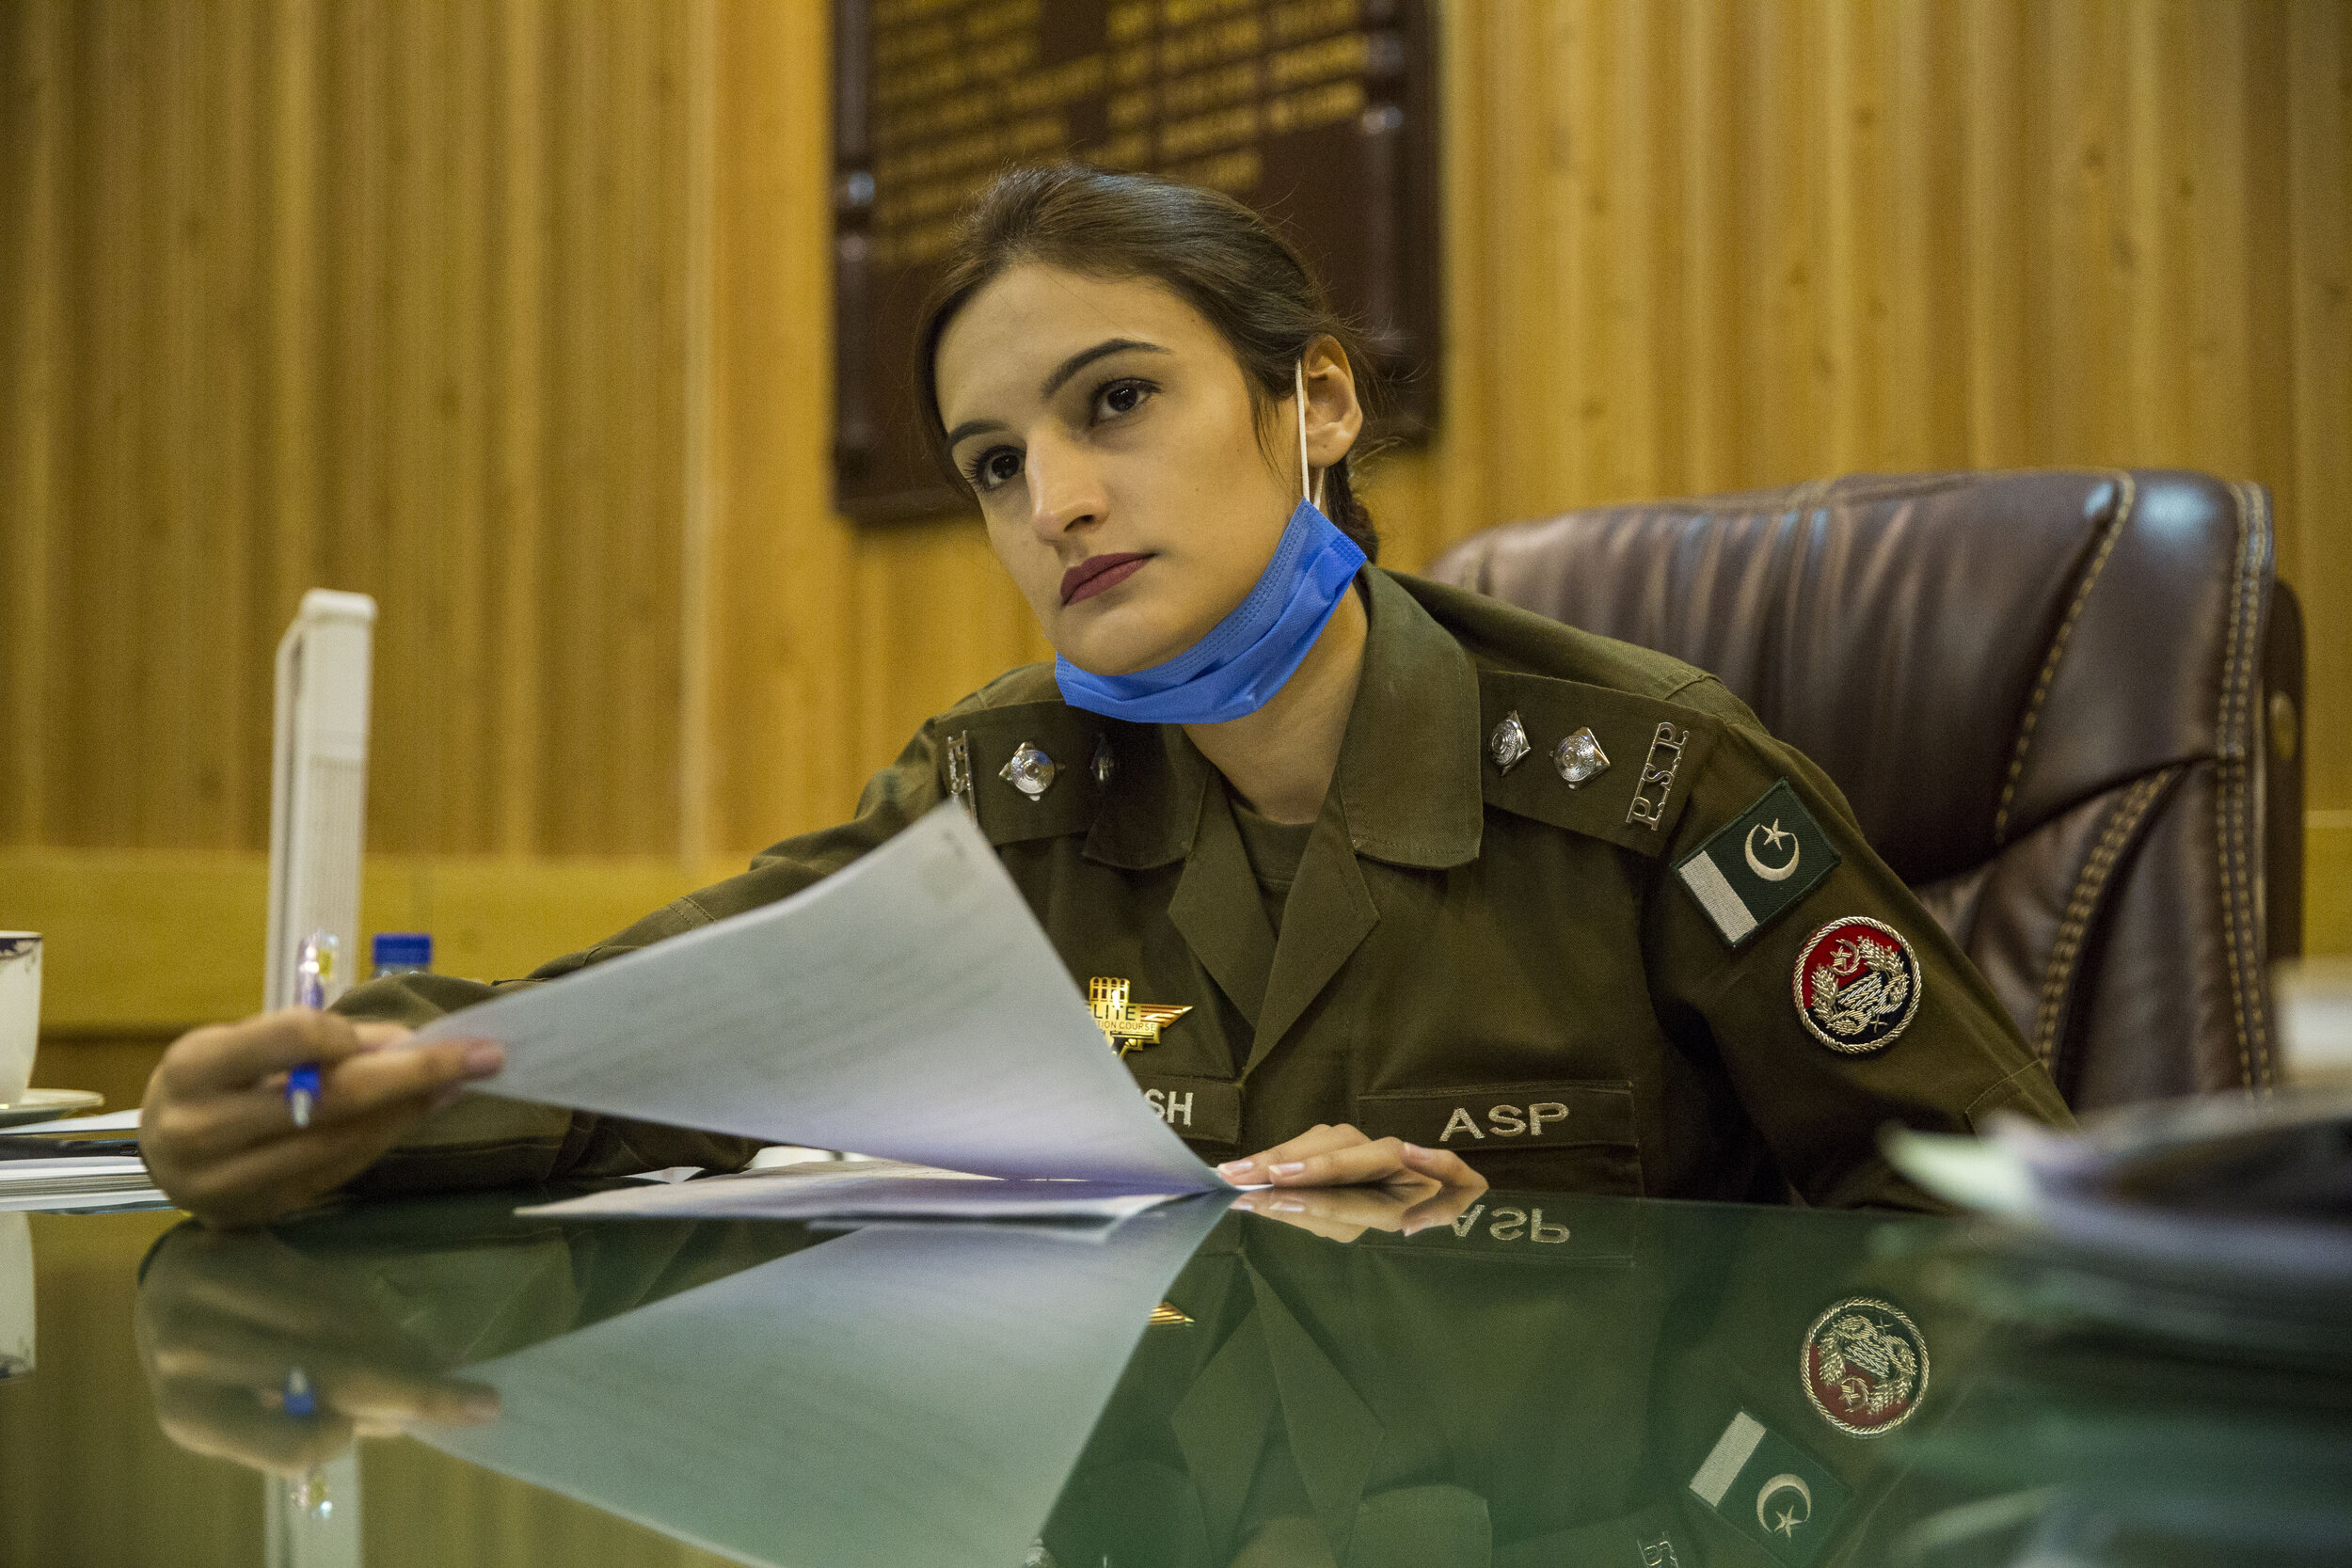  Beenish Fatima, assistant superintendent of police studies a case in her office. 